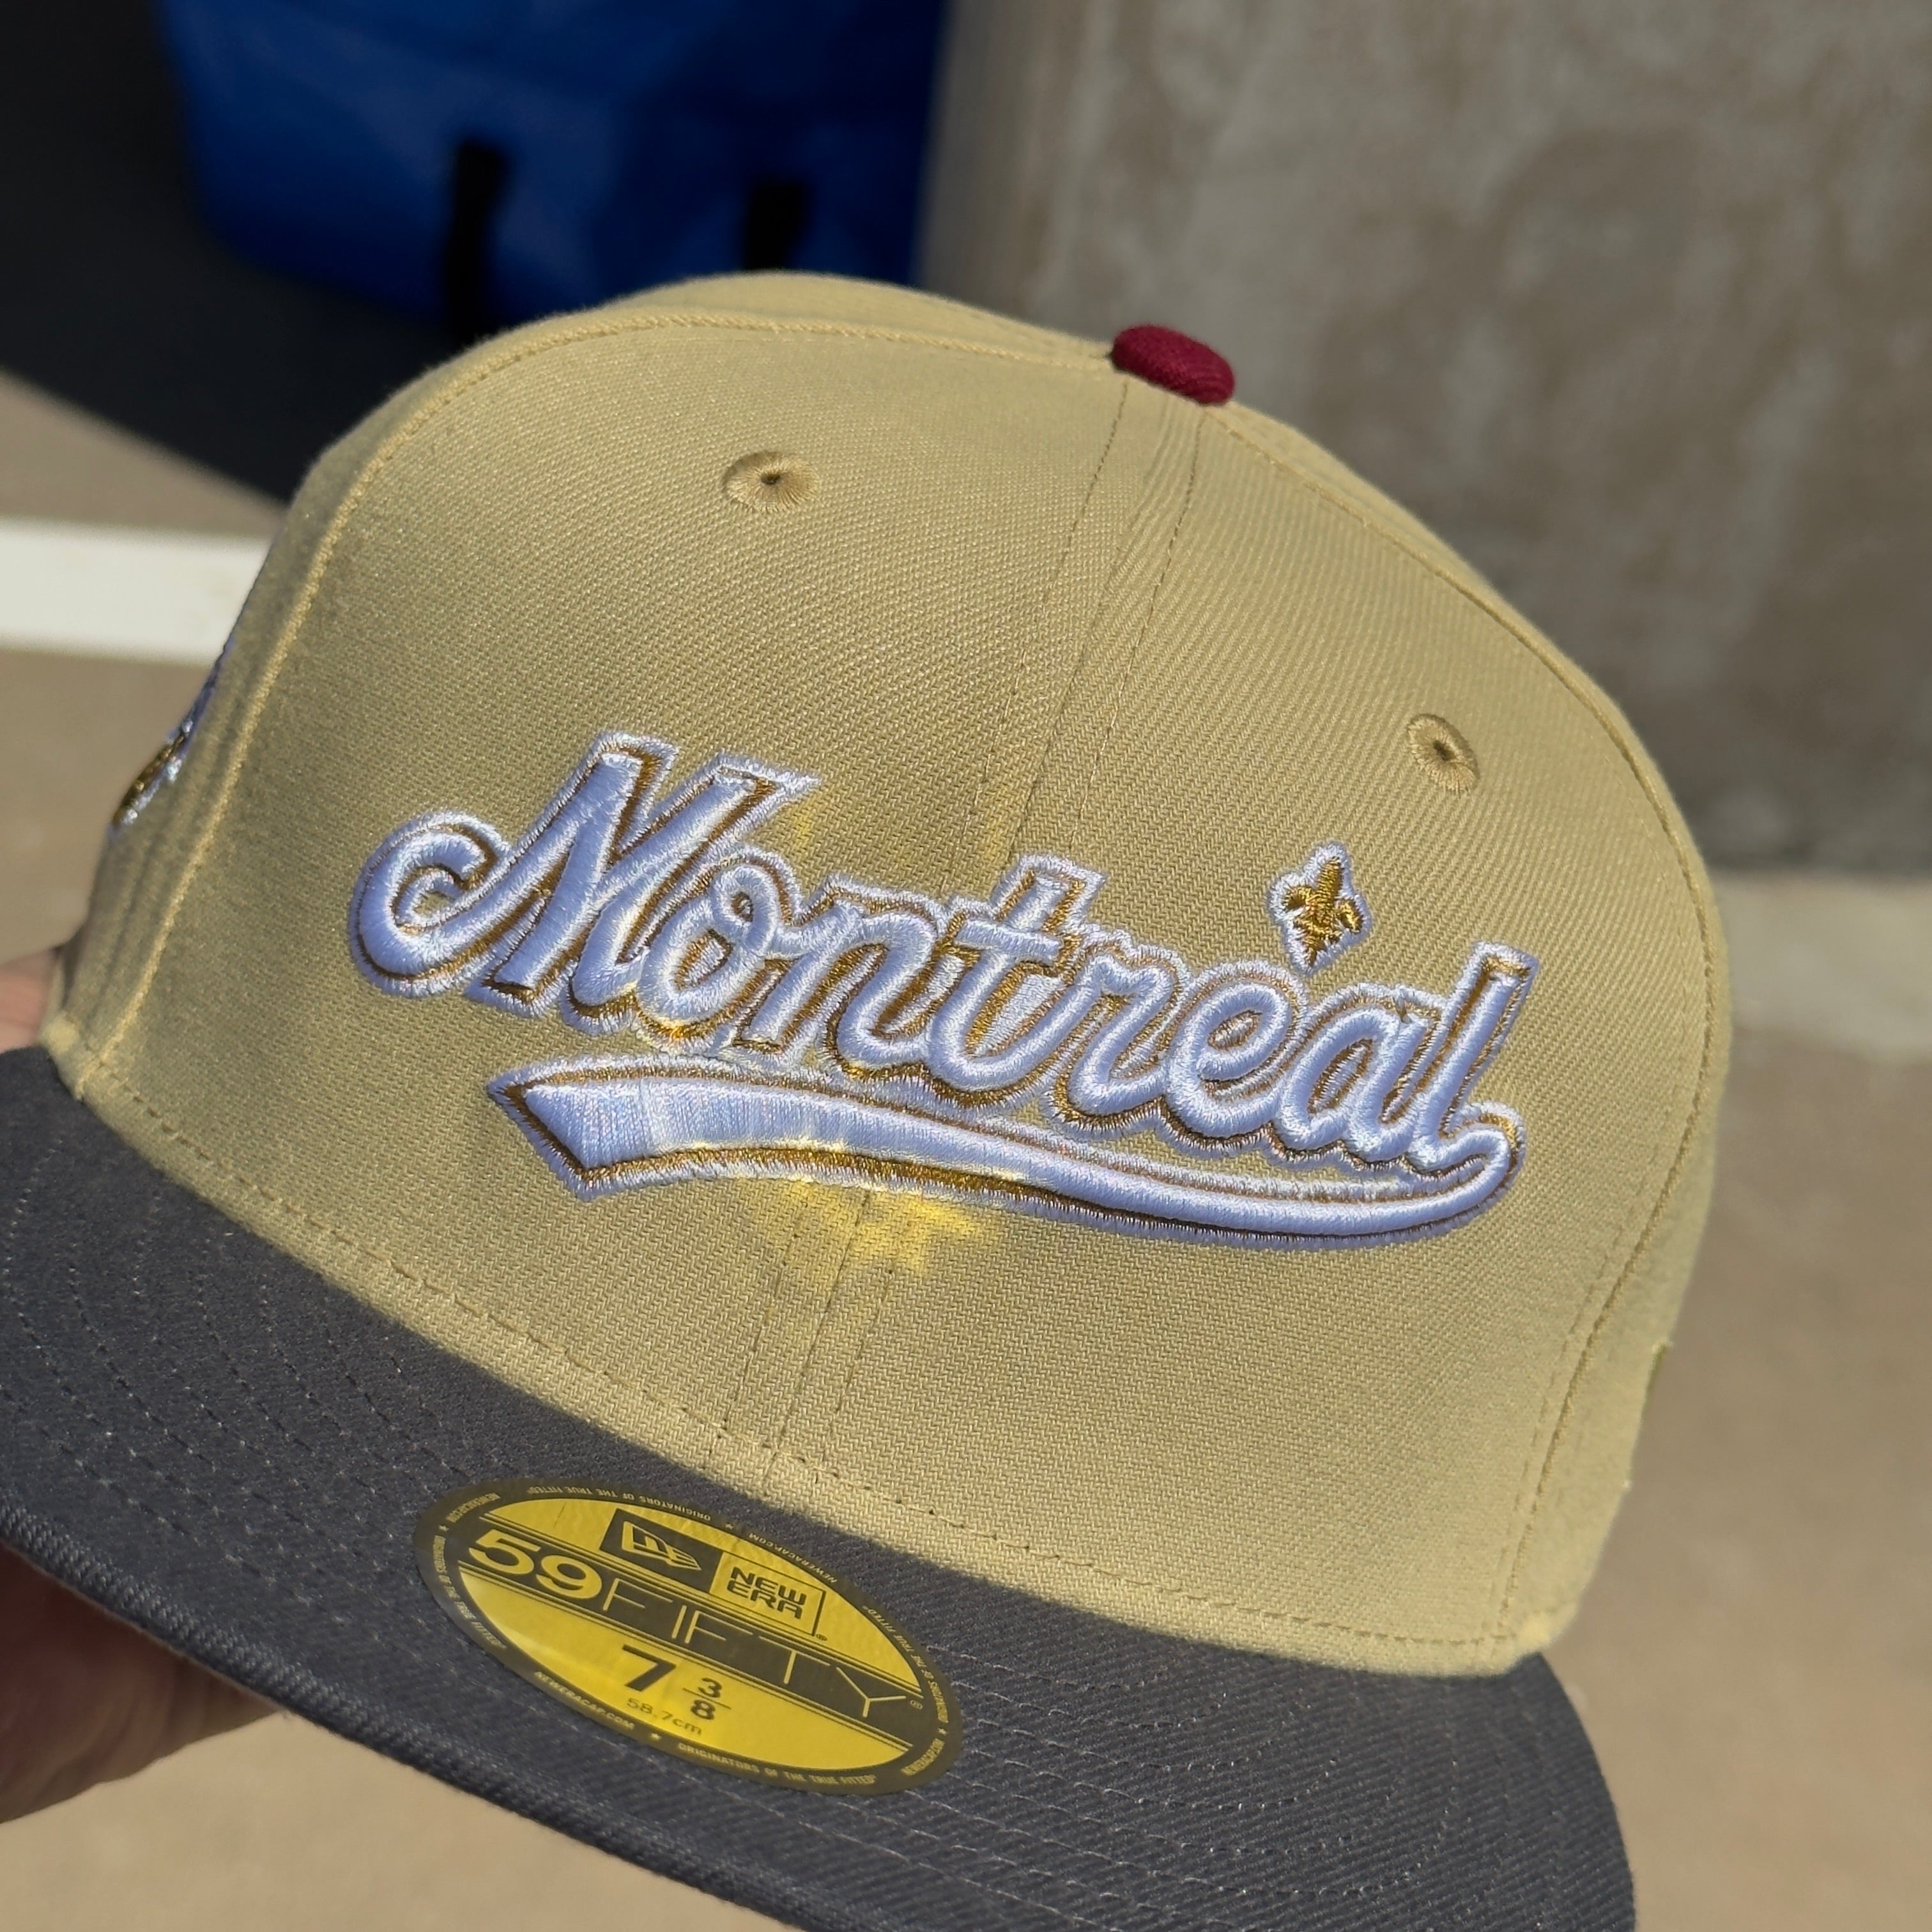 NEW Vegas Gold Montreal Expos Club Baseball Toronto 59fifty New Era Fitted Hat Cap